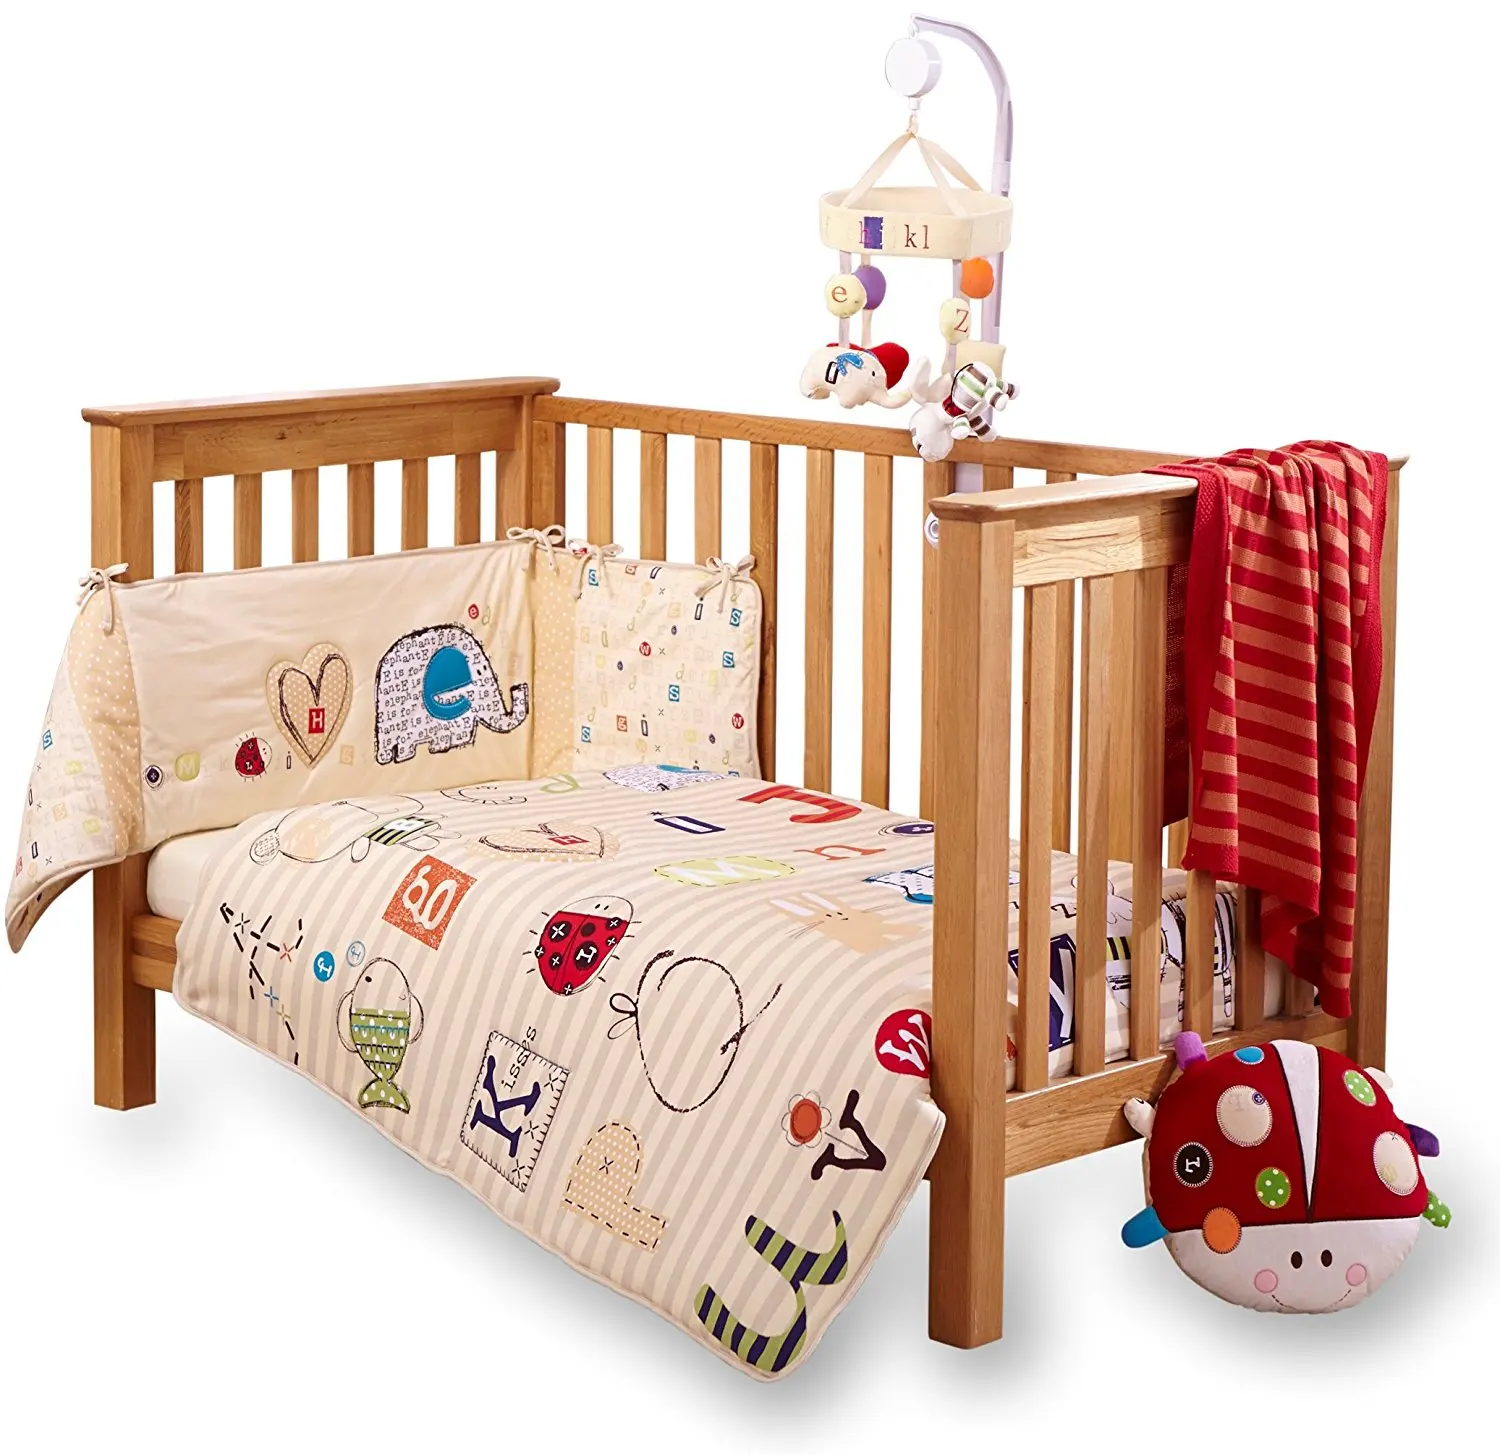 cot bed quilts